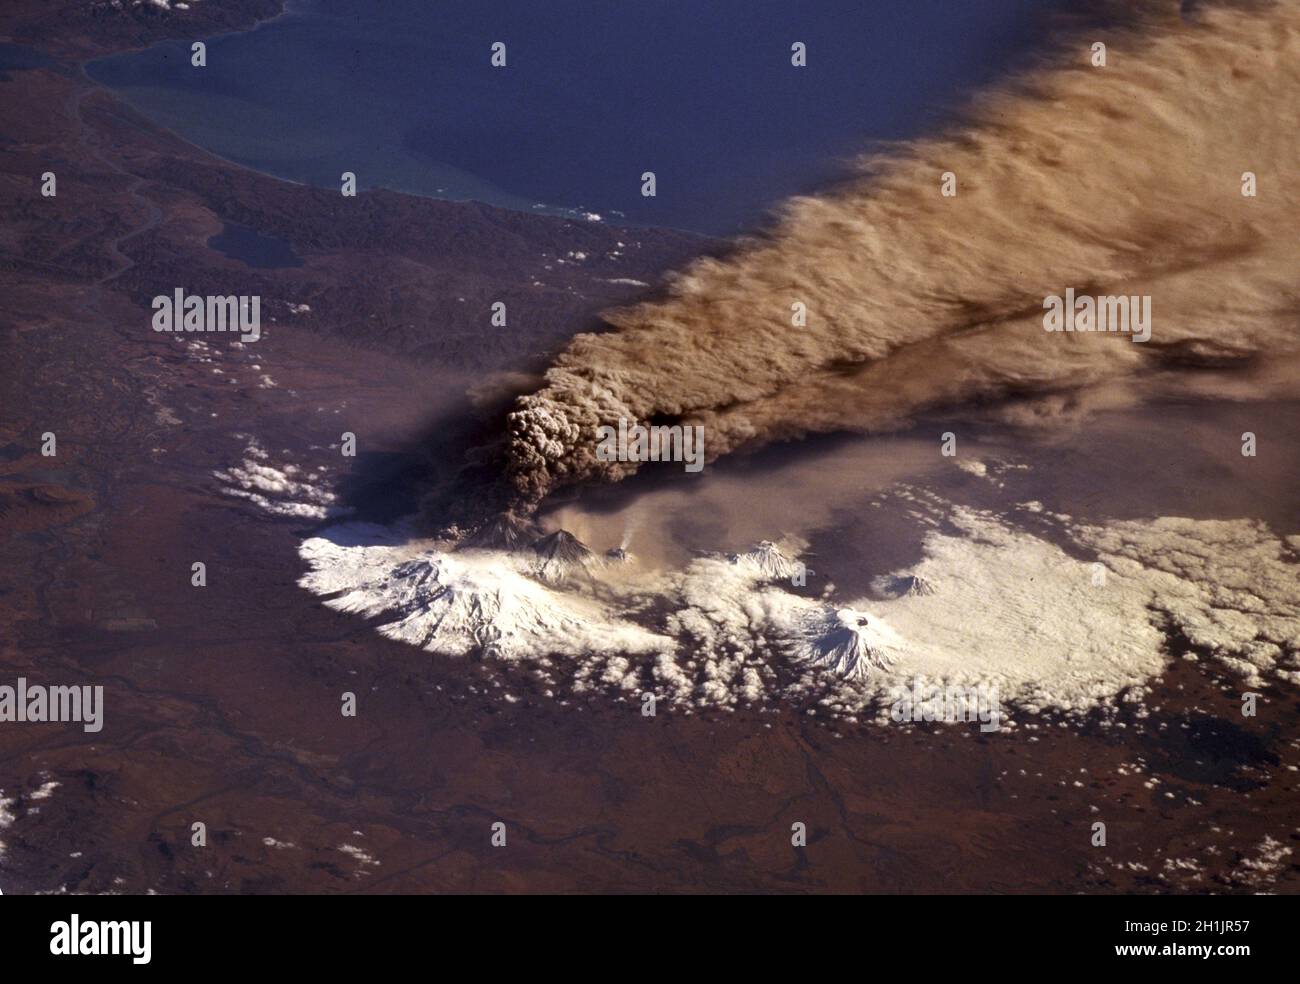 On October 1, 1994, Space Shuttle astronauts successfully took a series of photographs of Klyuchevskaya Volcano erupting near the east-central coast of Kamchatka Peninsula in Russia   A unique optimised and enhanced version of a NASA image / credit NASA. Stock Photo